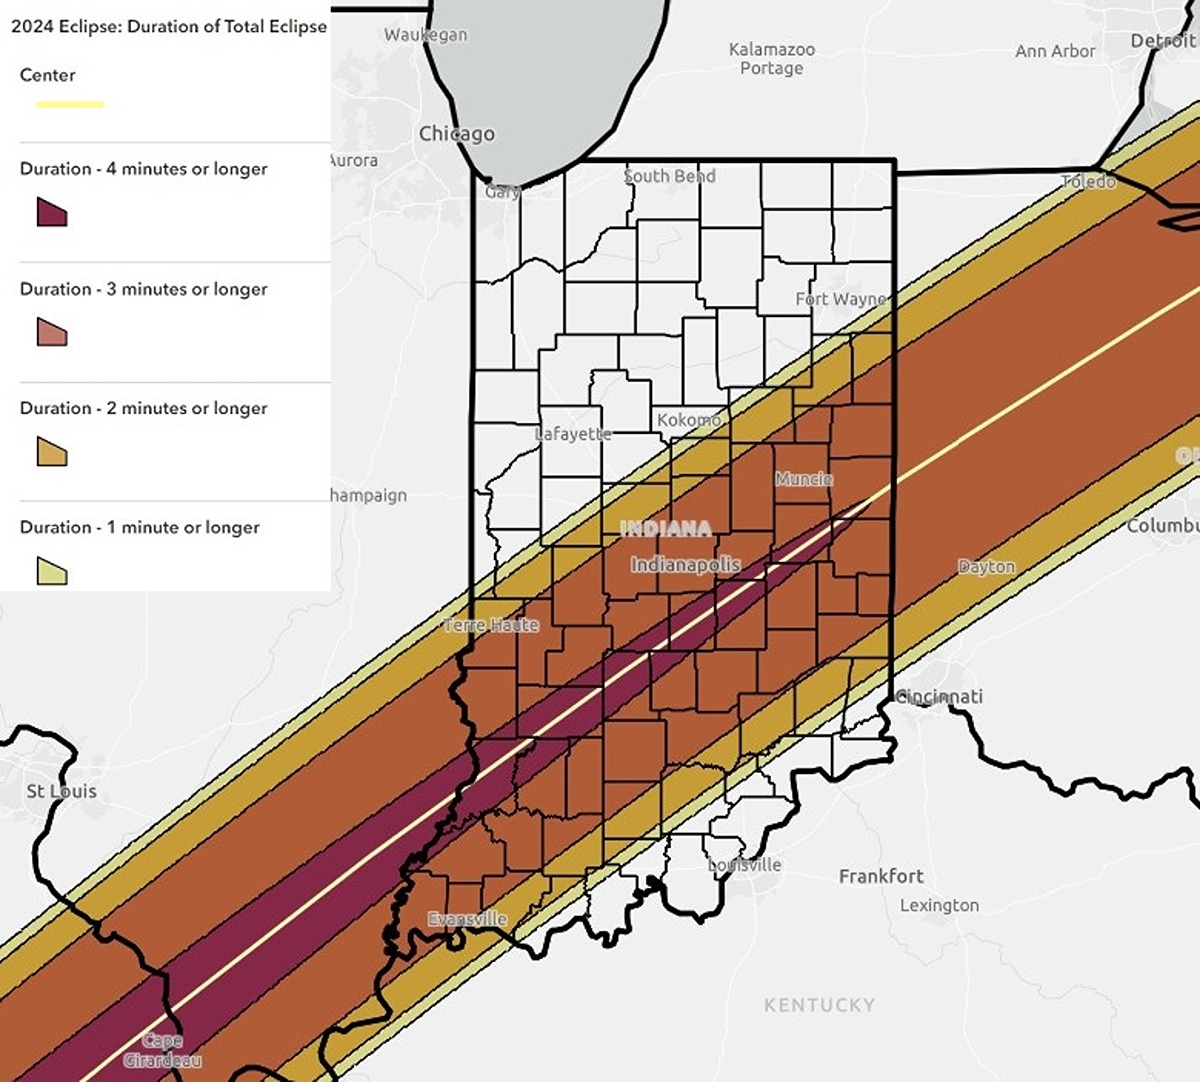 This map from the National Weather Service shows the path of the eclipse as it crosses through Indiana. The closer to the center of the path, the more striking and long-lasting the eclipse will be. 